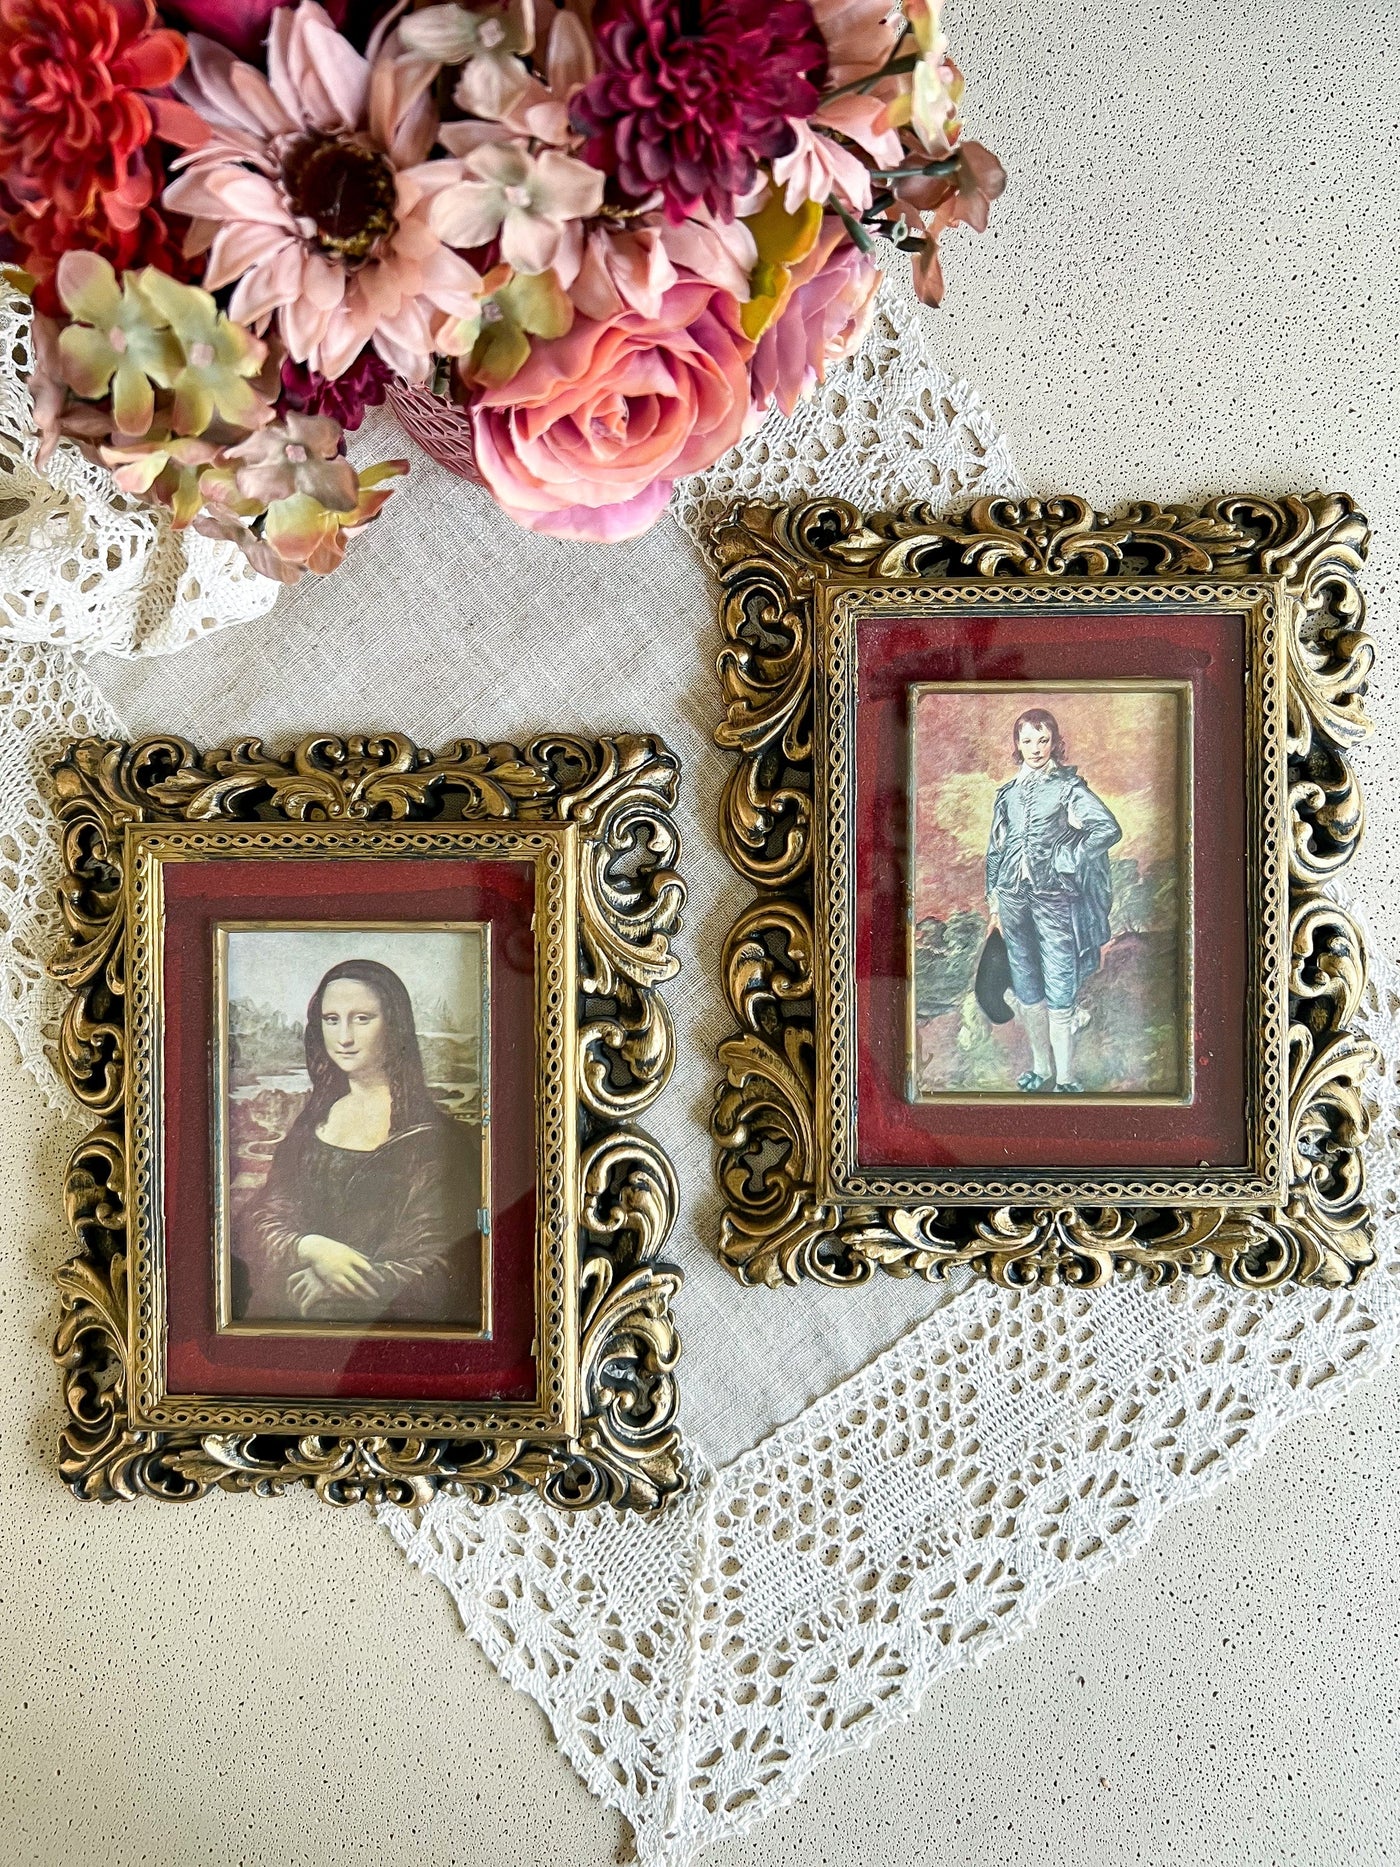 Vintage Gilded Mona Lisa & Blue Boy Framed Pictures Set with Red Velvet Matte Revive In Style Vintage Furniture Painted Refinished Redesign Beautiful One of a Kind Artistic Antique Unique Home Decor Interior Design French Country Shabby Chic Cottage Farmhouse Grandmillenial Coastal Chalk Paint Metallic Glam Eclectic Quality Dovetailed Rustic Furniture Painter Pinterest Bedroom Living Room Entryway Kitchen Home Trends House Styles Decorating ideas